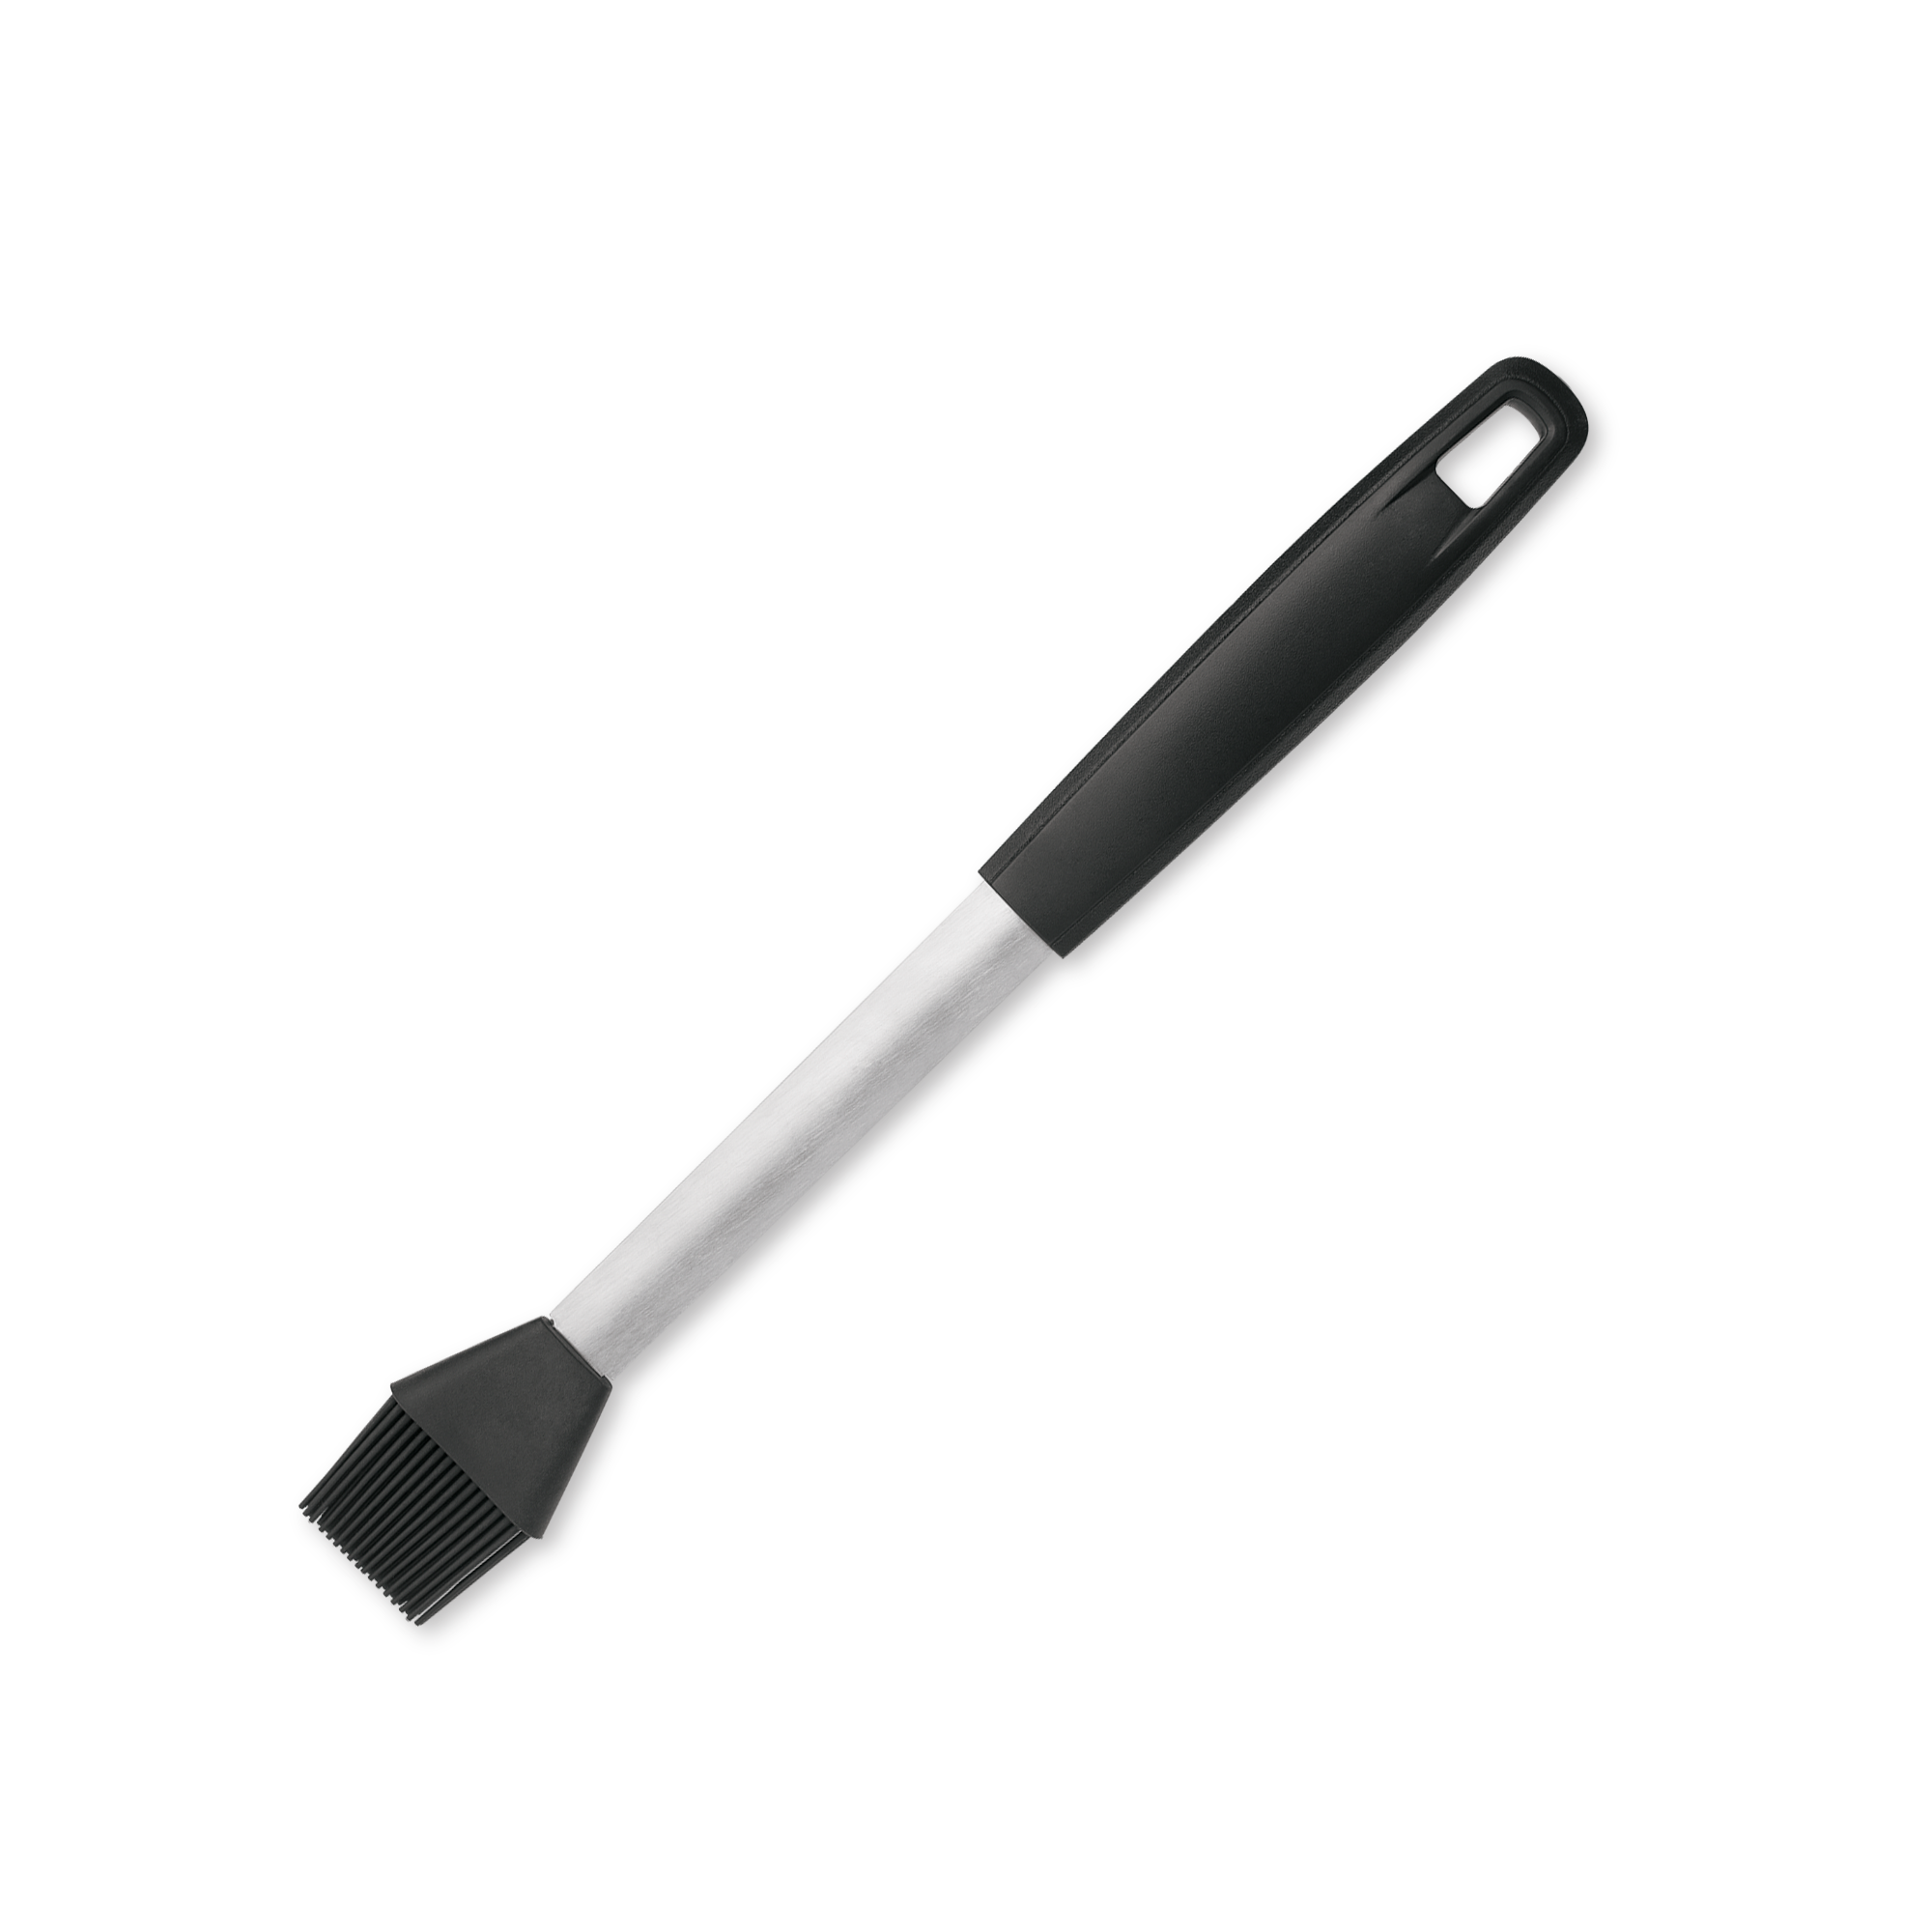 Grill Basting Brush: stainless steel, silicone bristles, non-slip nylon handle, easy-clean removable head, Brandless. Designed for outdoor grills.